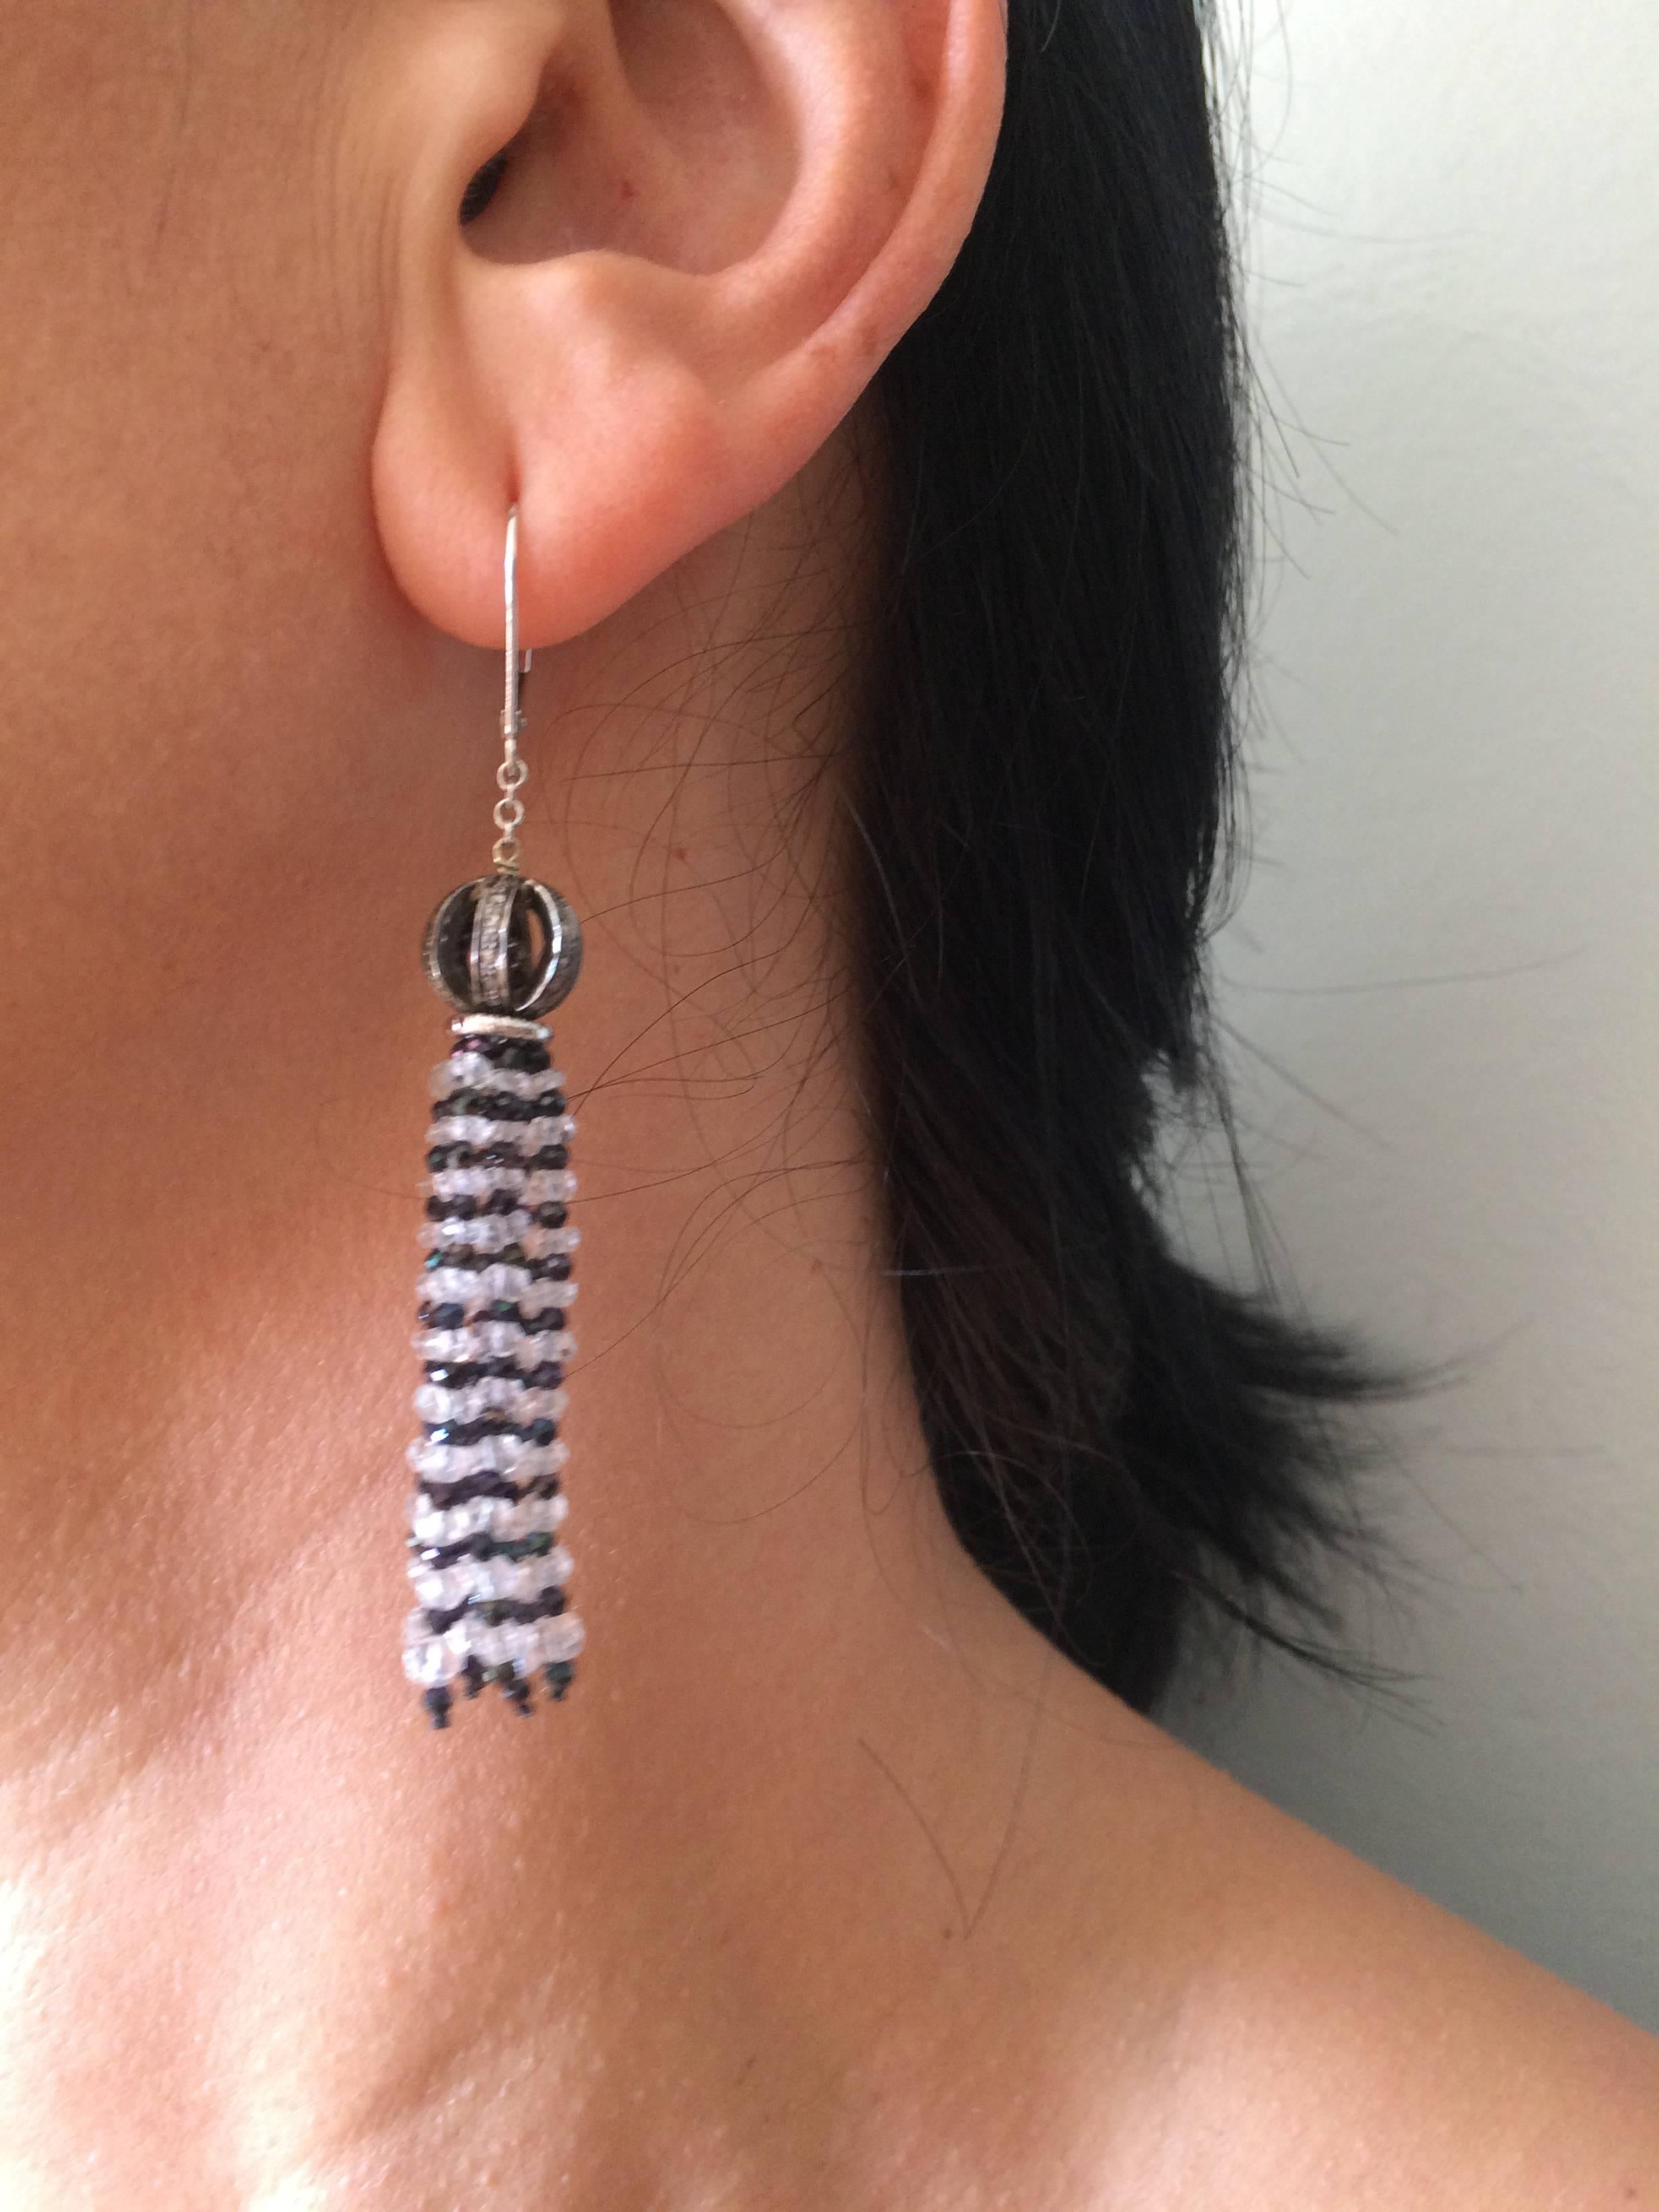 Women's Diamond Encrusted Ball Earrings with Quartz and Black Spinel Tassels by Marina J